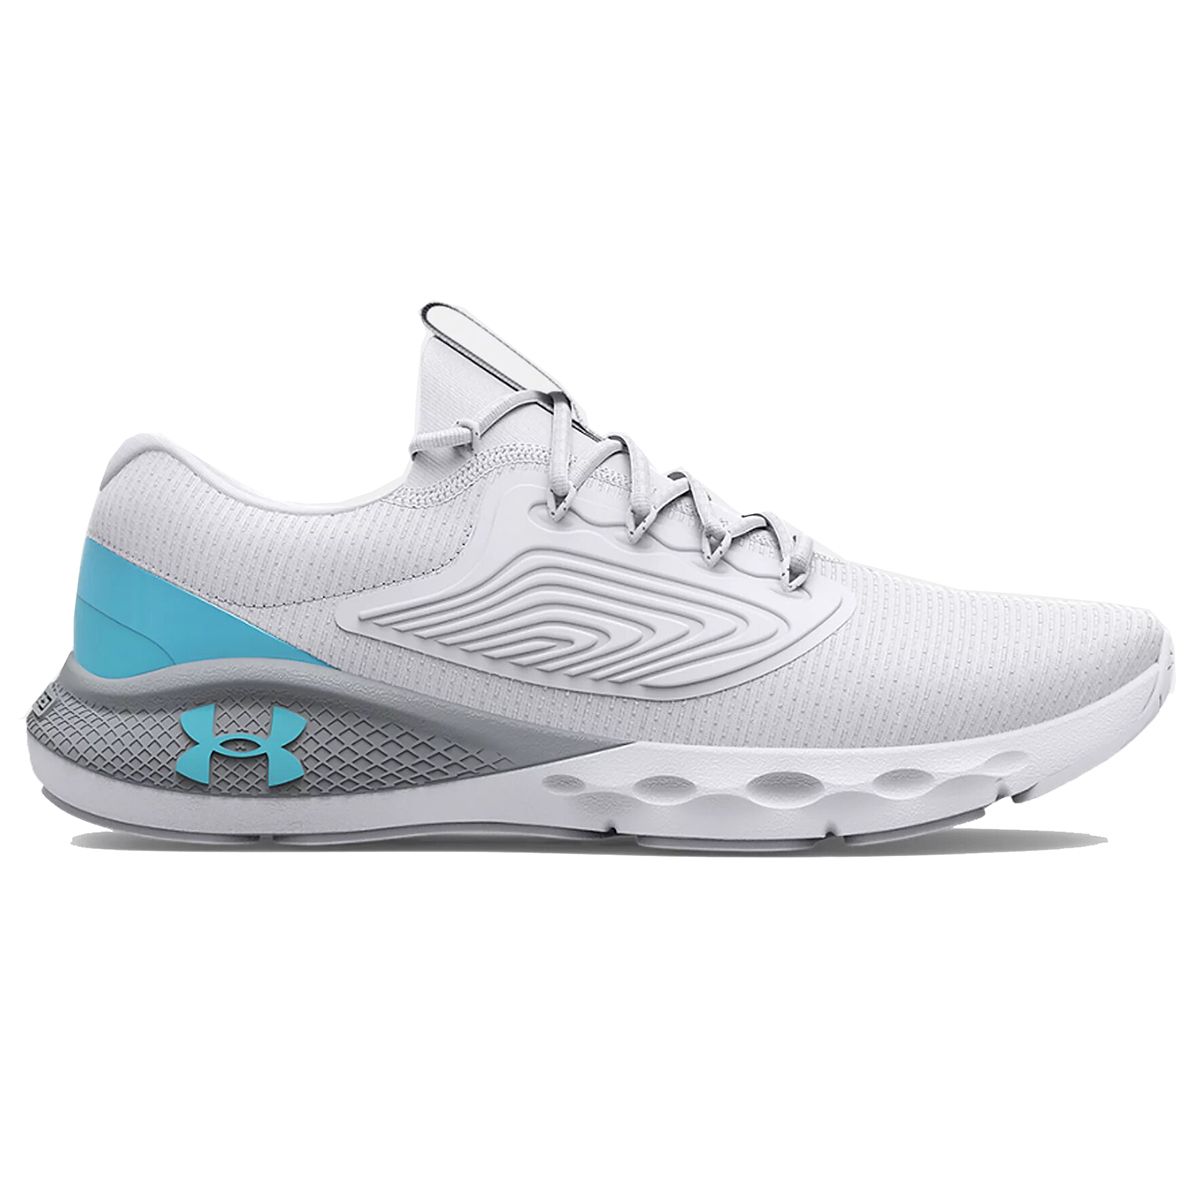 Under Armour Charged Vantage 2 Women's Running Shoes 3025406